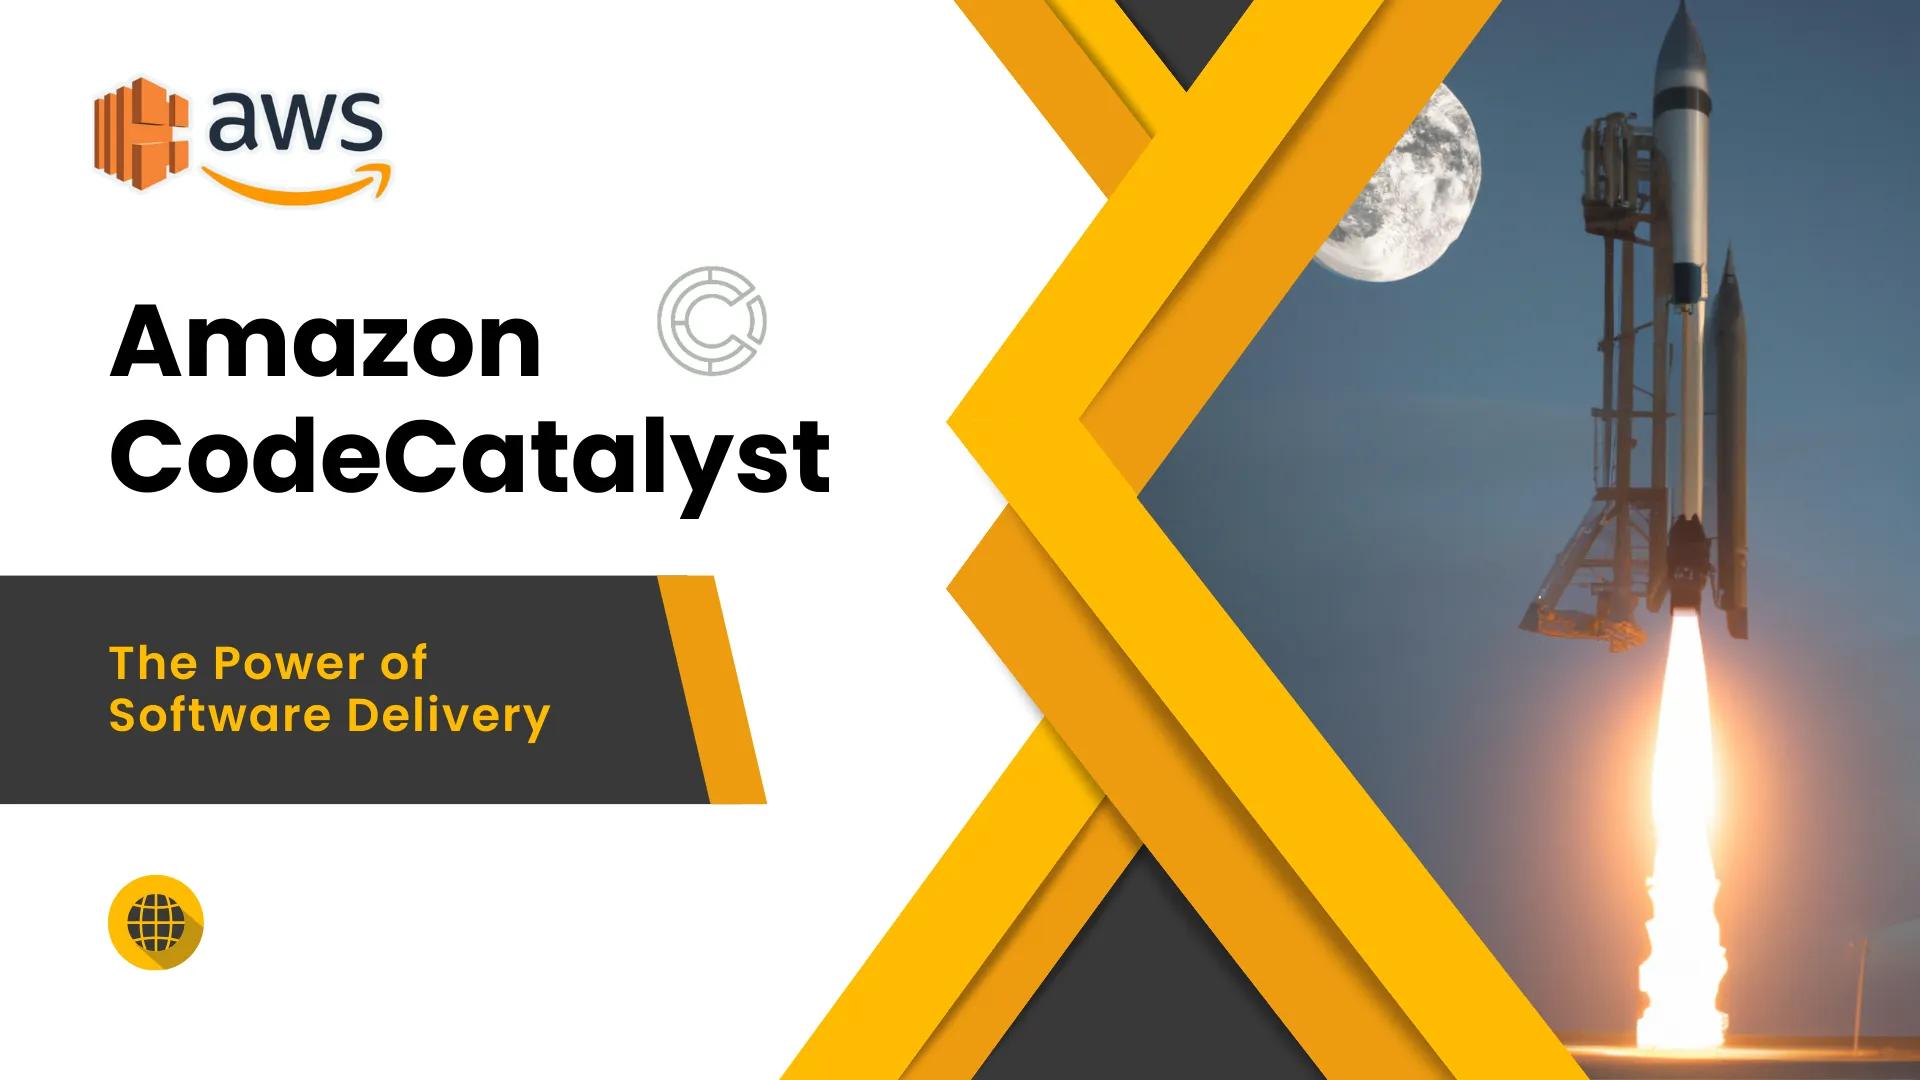 Amazon CodeCatalyst: the Power of Software Delivery